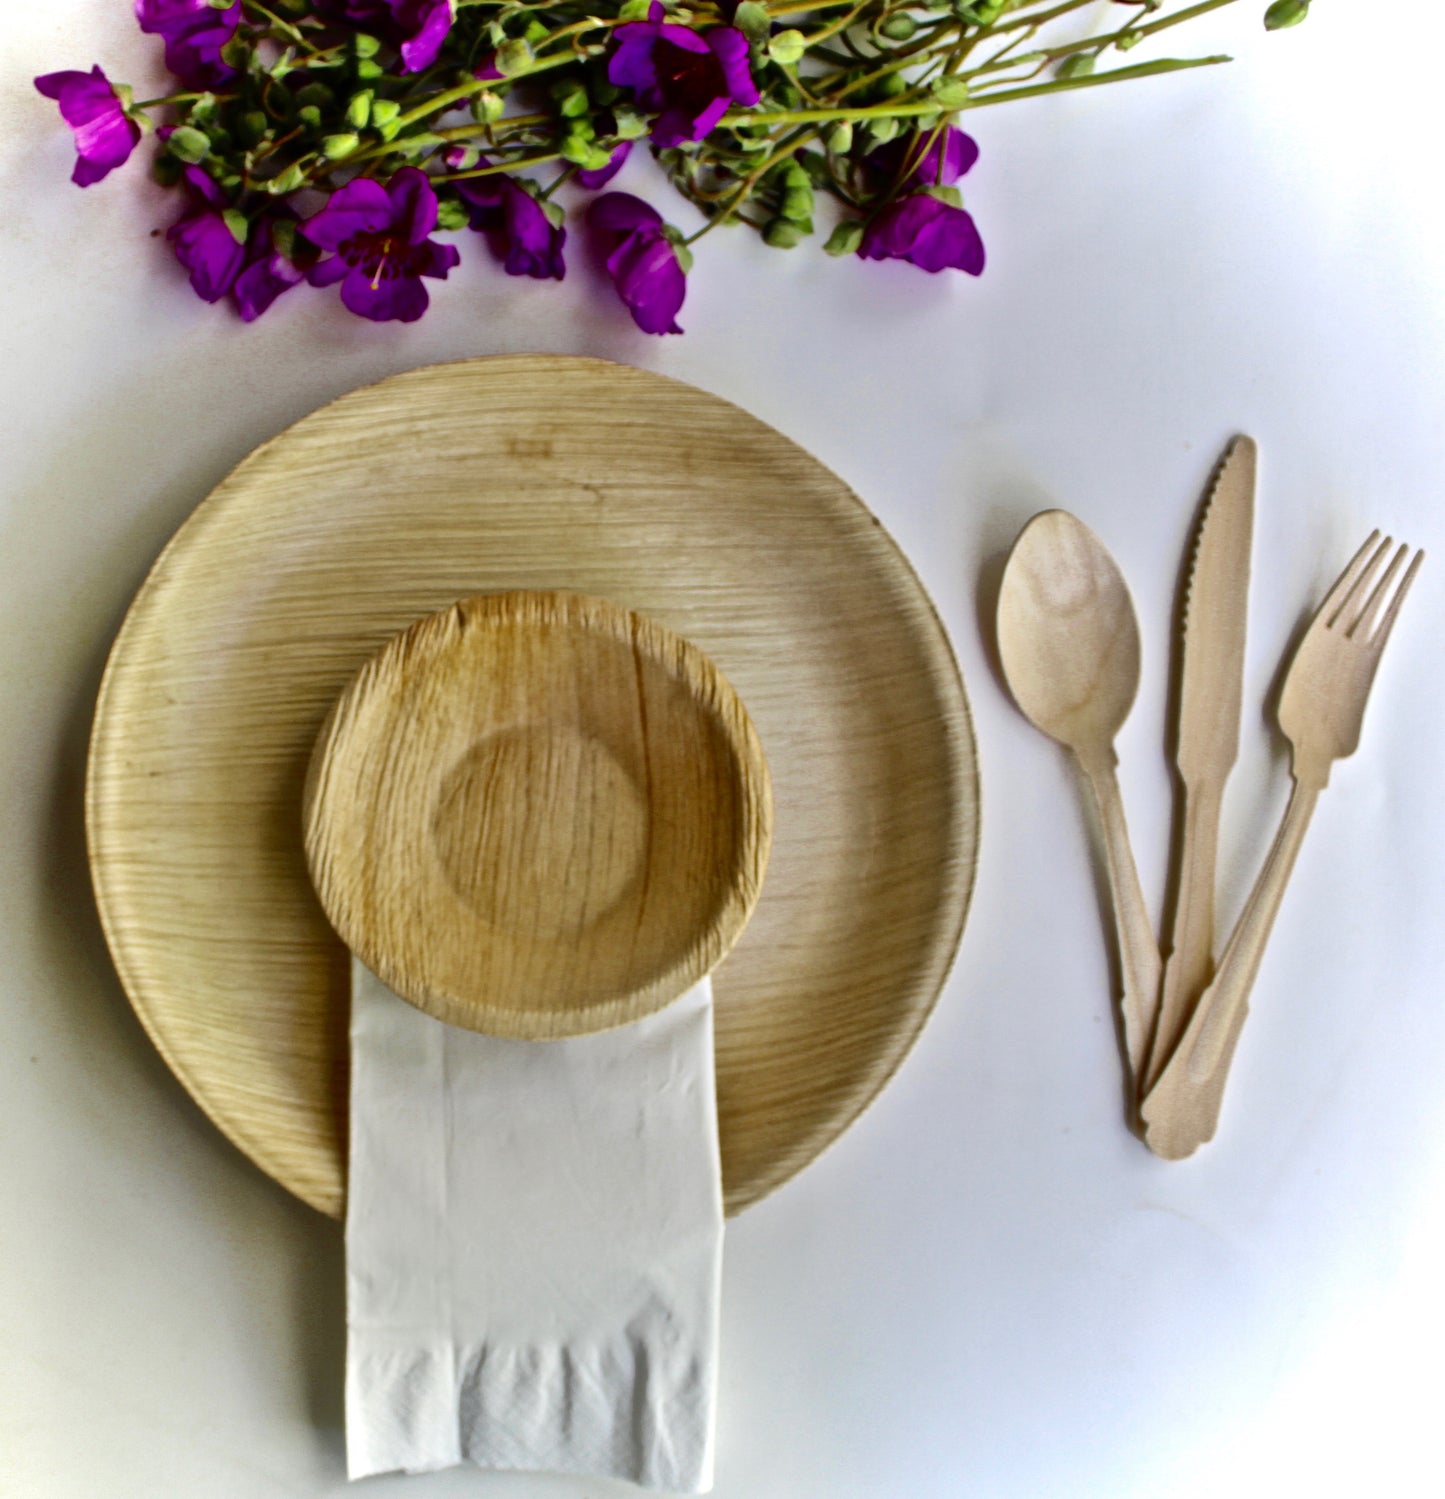 Copy of Copy of Bamboo Type Palm Leaf plates 25 Pice 10" Square - 25  pic Cup Paper  75 Pic cutlery  and 30  pice Napkin